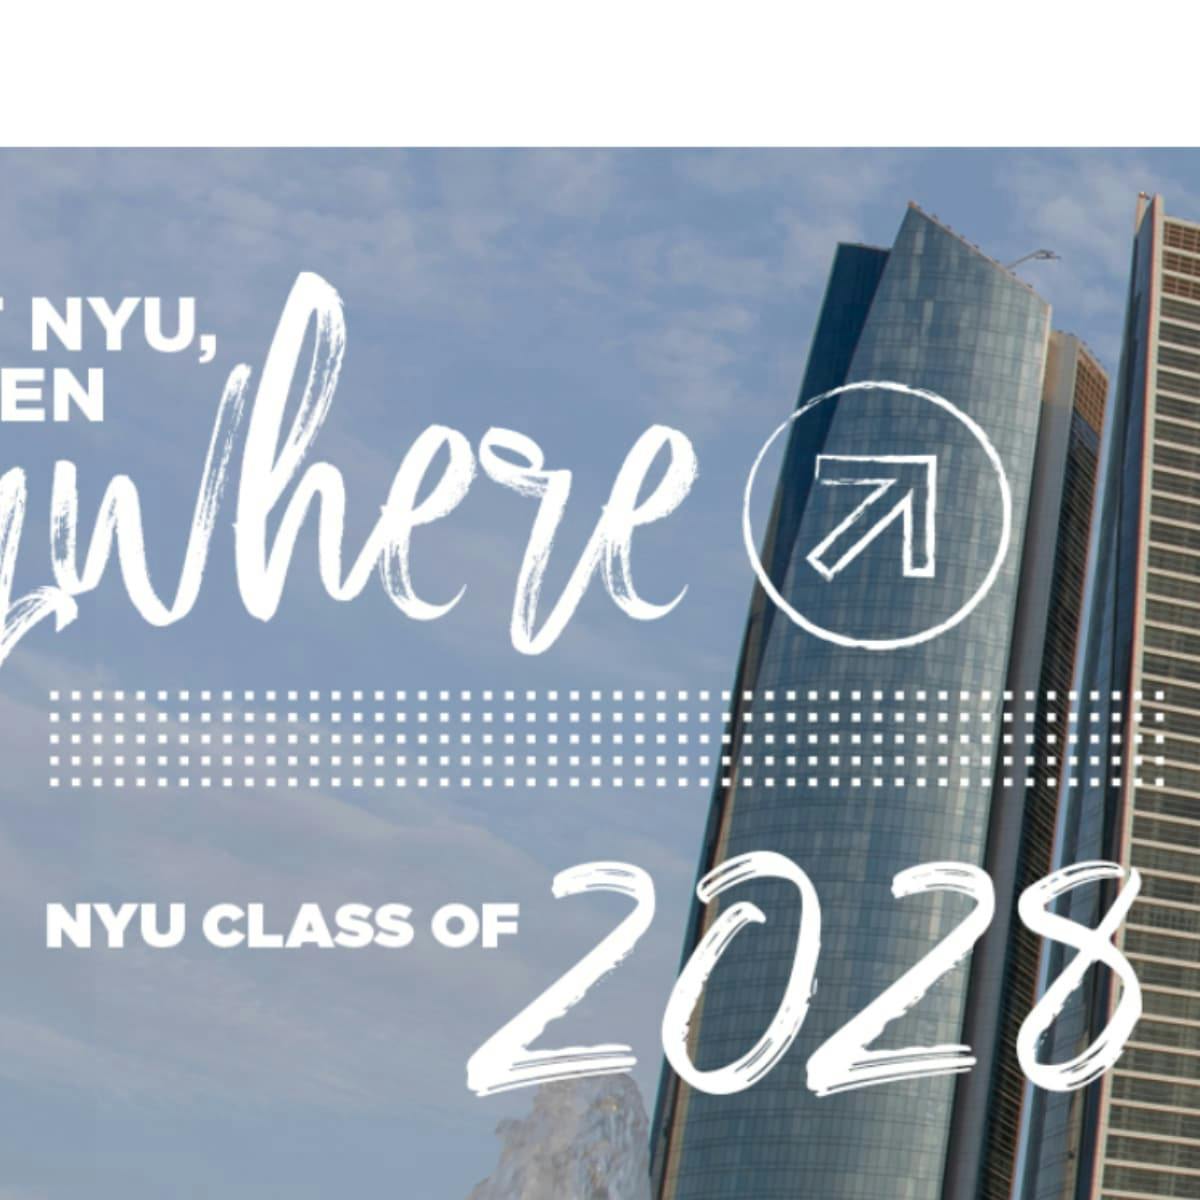 NYU Abu Dhabi Сlass of 2028 with a full ride scholarship as a climate activist from Russia